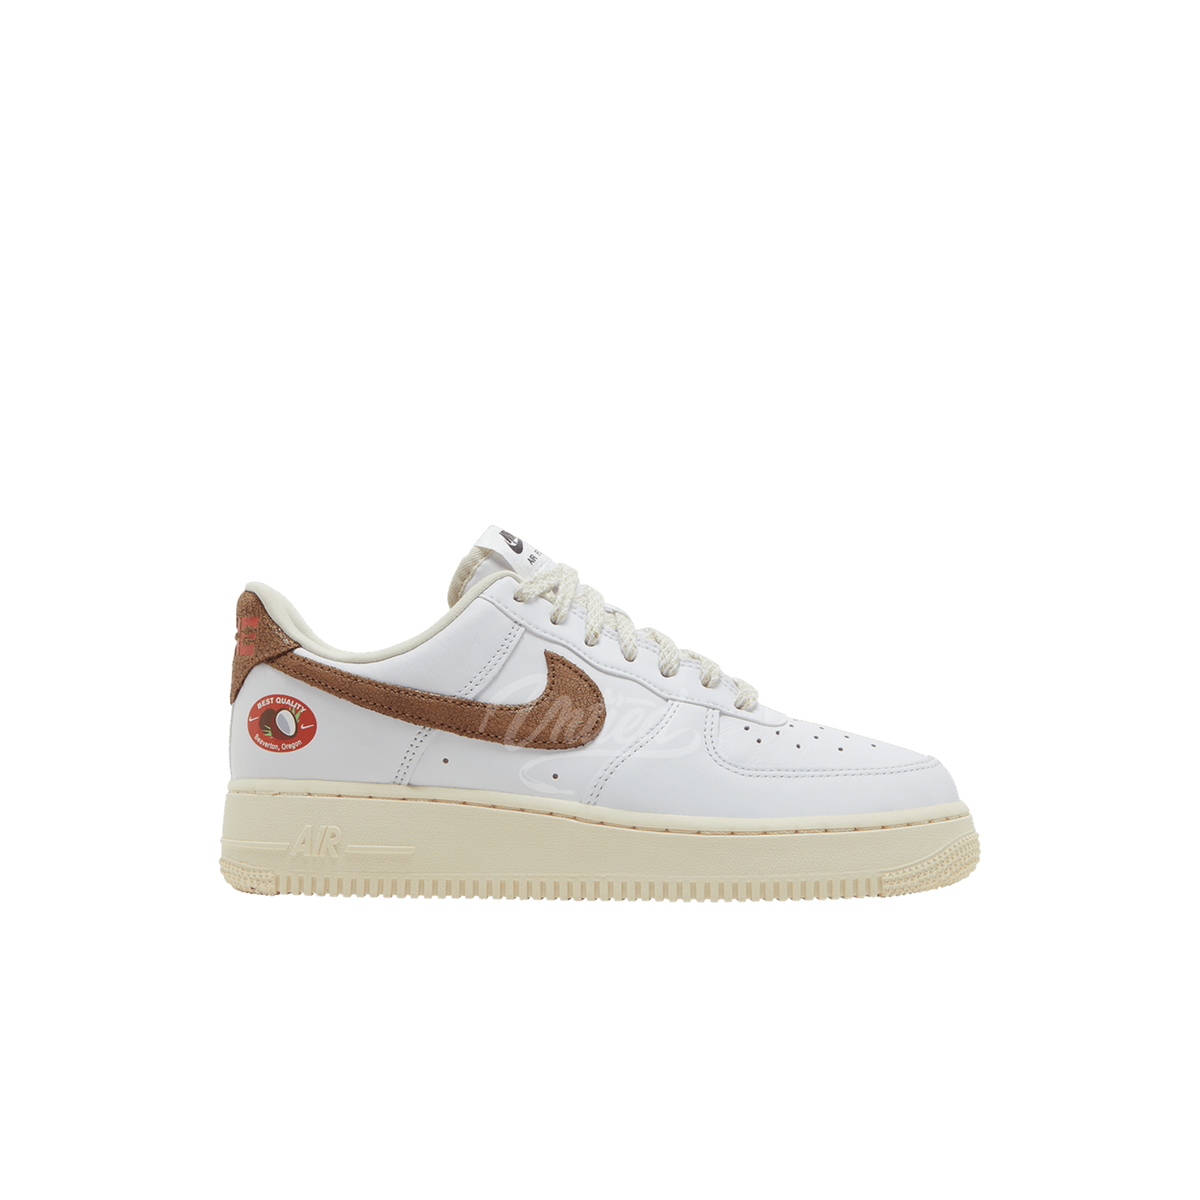 Air Force 1 "Coconut" (W)